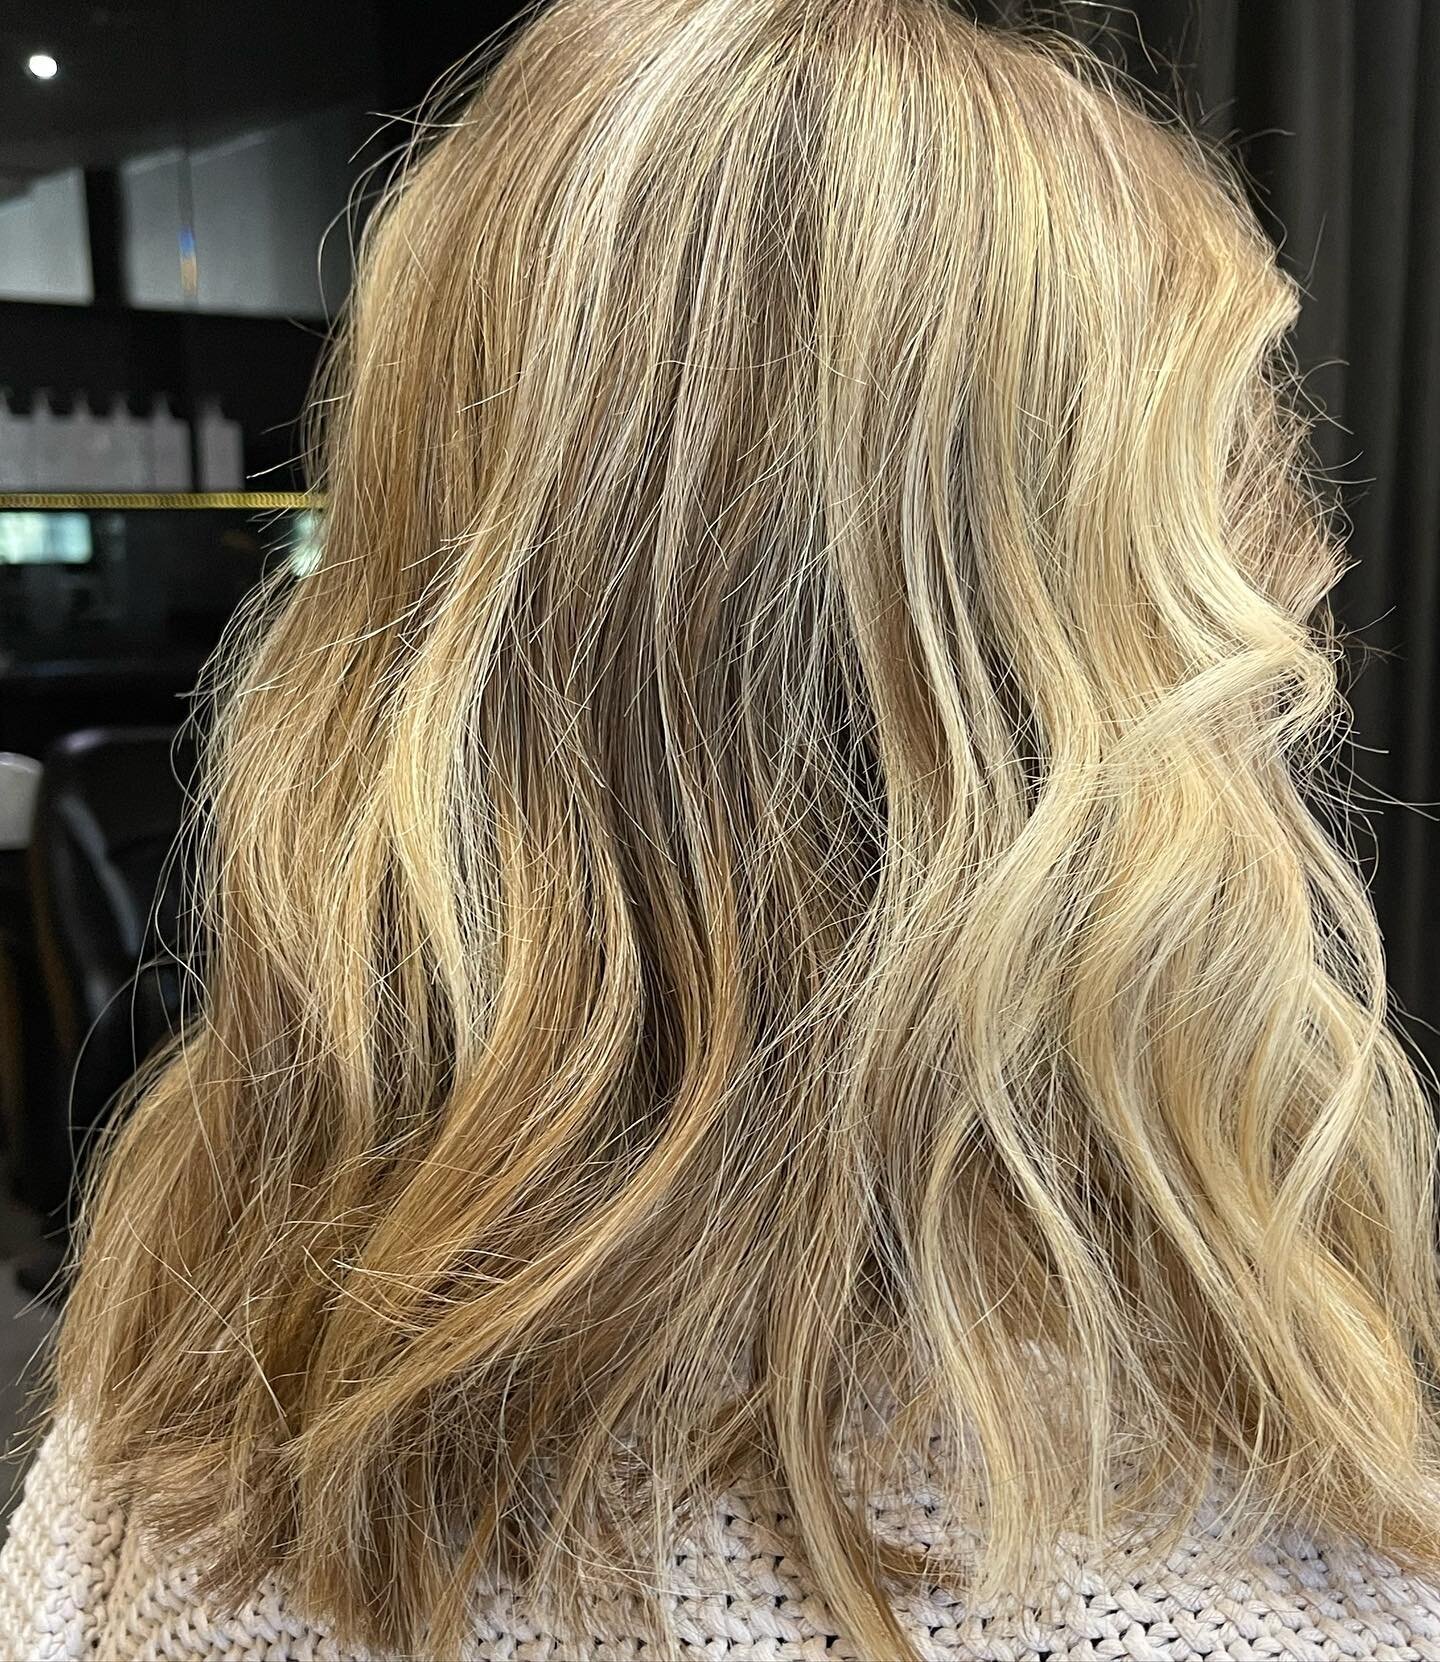 ✨Brighter Daze ✨
We are obsessing over this lived in, textured blonde balayage by Jason 🖤
#goldcoasthairstylist #goldcoasthairsalon